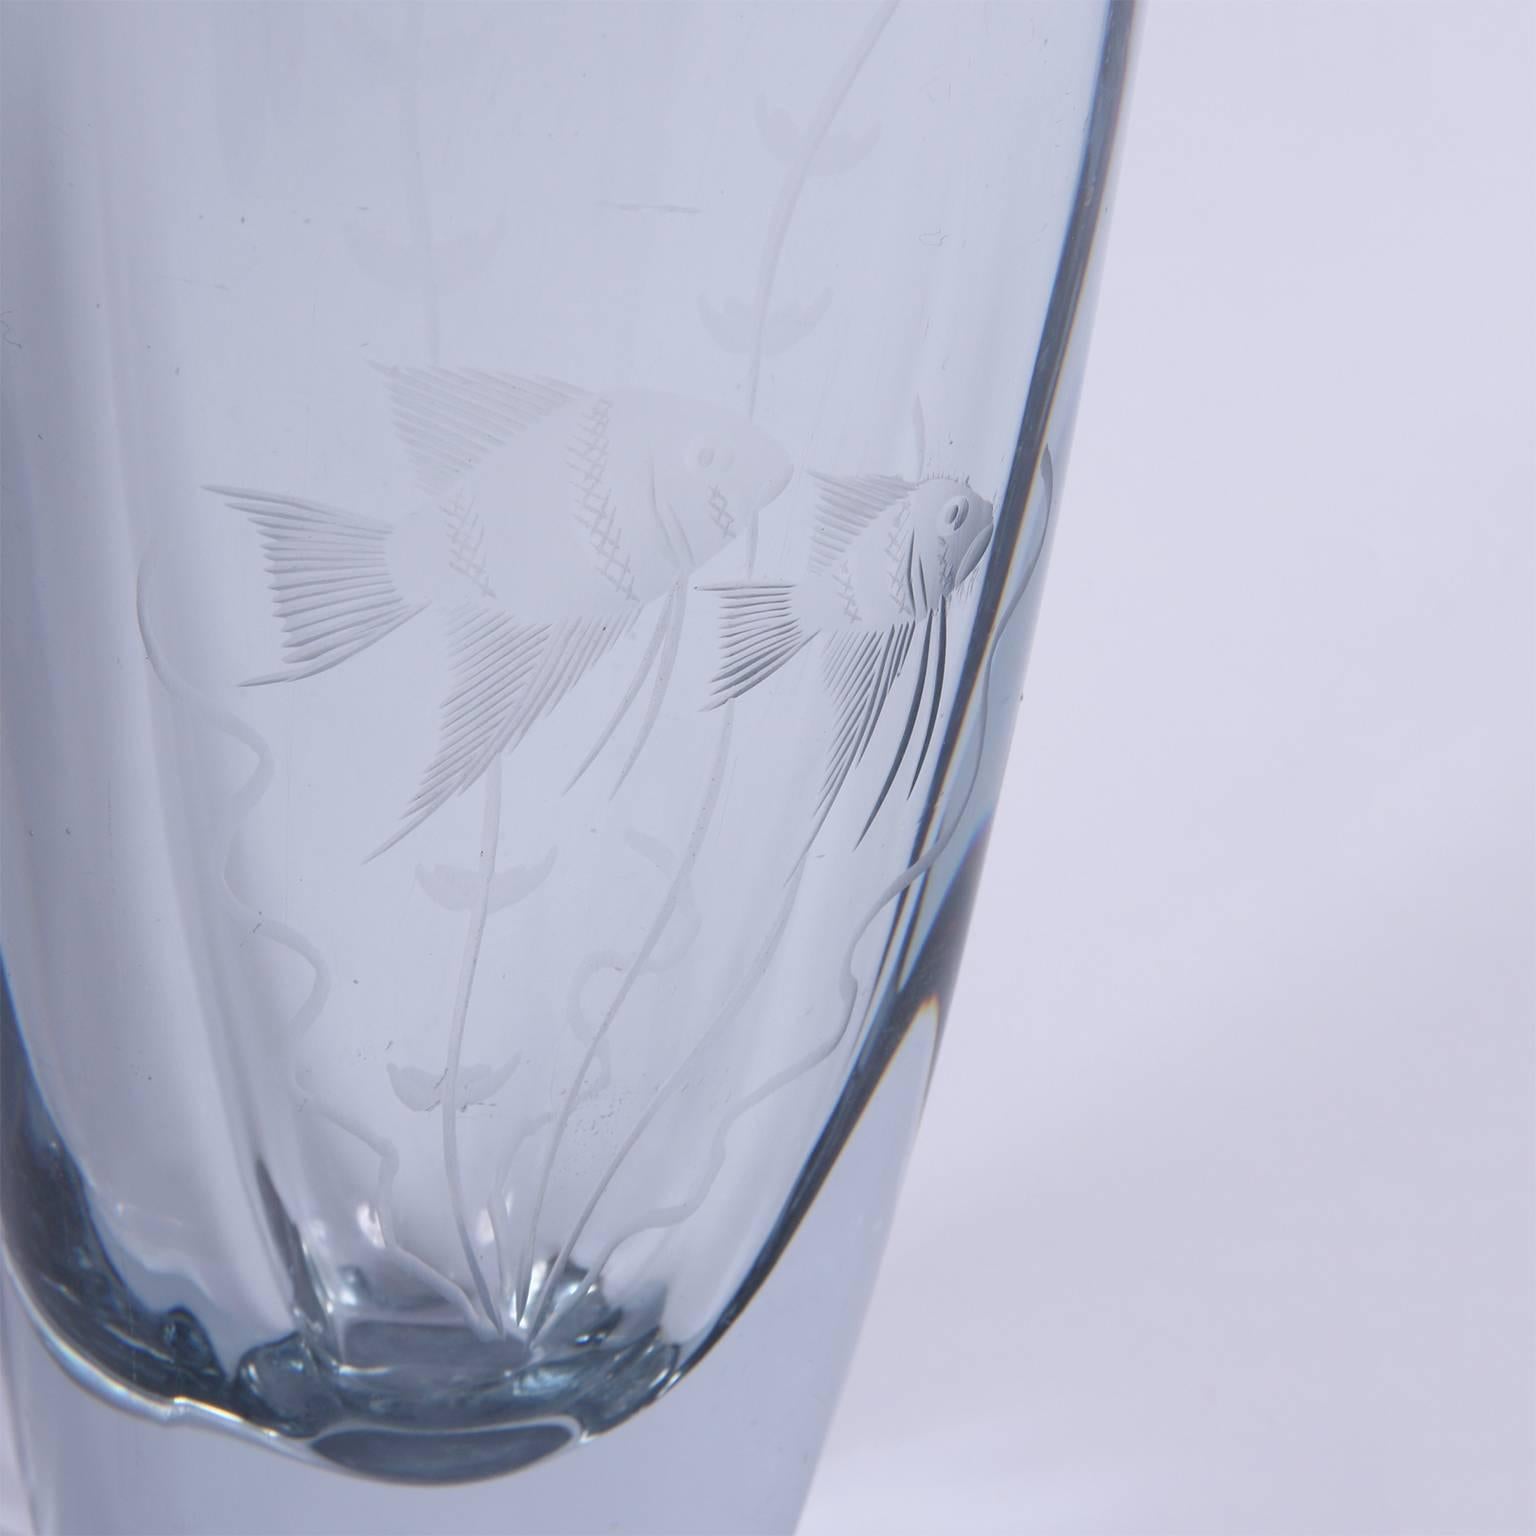 Heavy glass vase, it has deep etching with a detailed fish design.